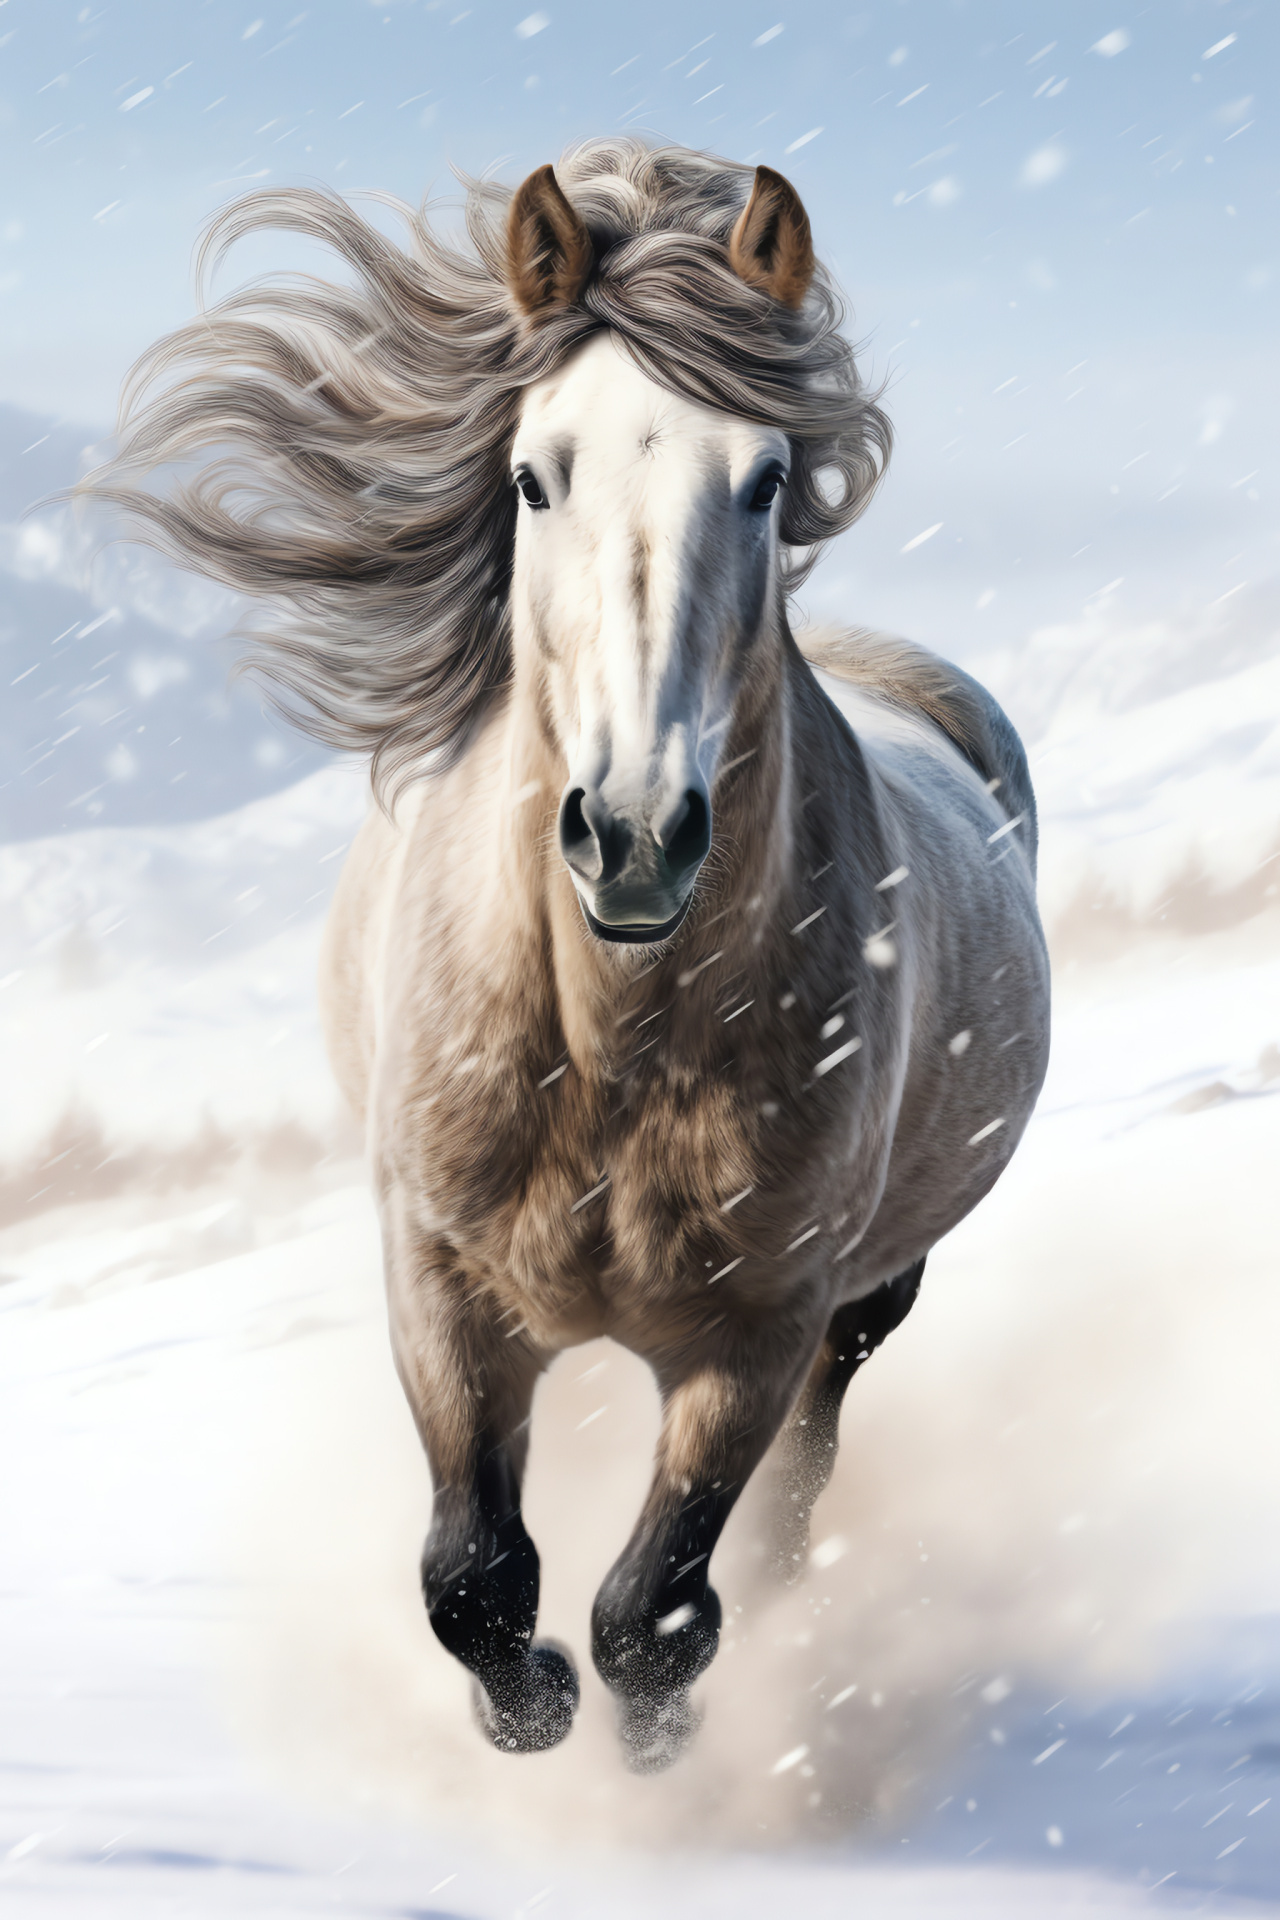 Snow Horse, Wintry equine, Frosted equestrian, Shaggy mane, Arctic steed, HD Phone Image